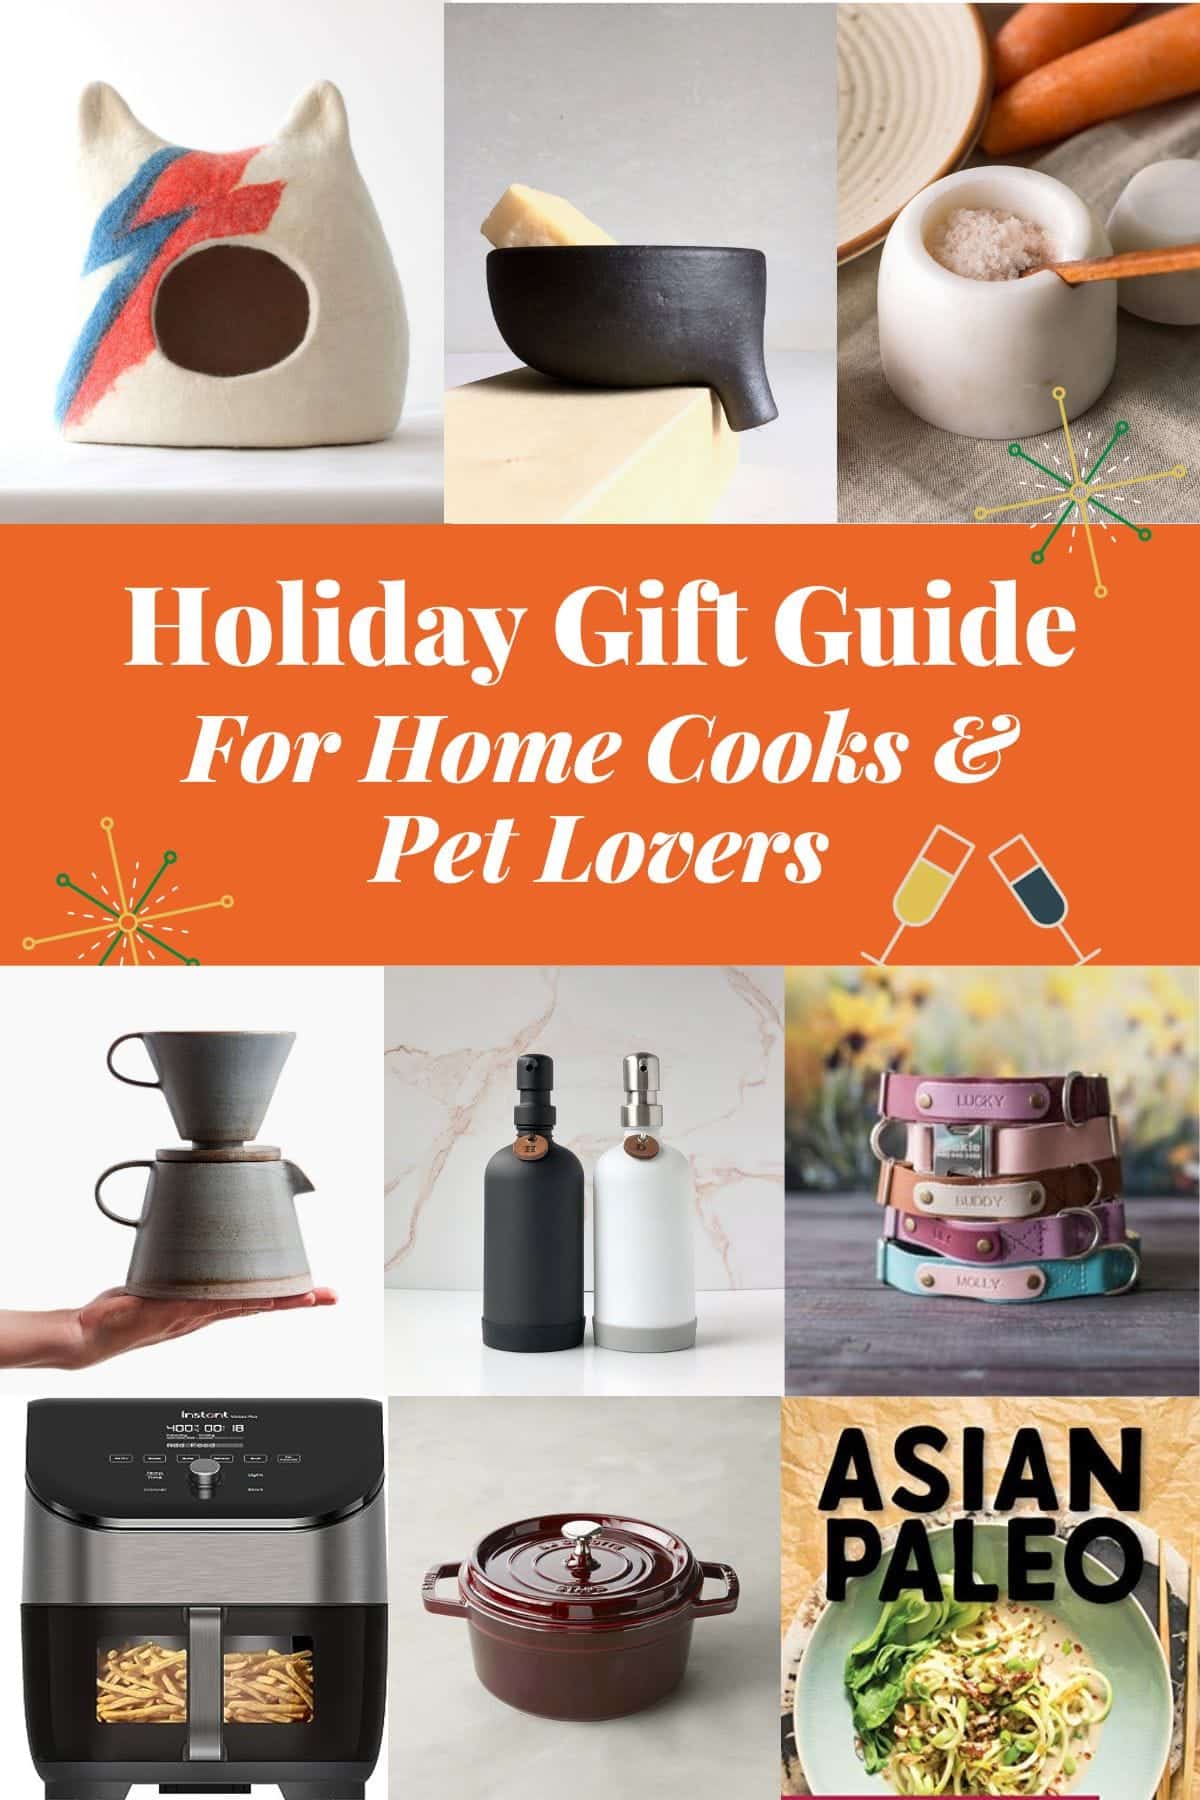 Photo shows a collection of gift guides for Christmas gift guide